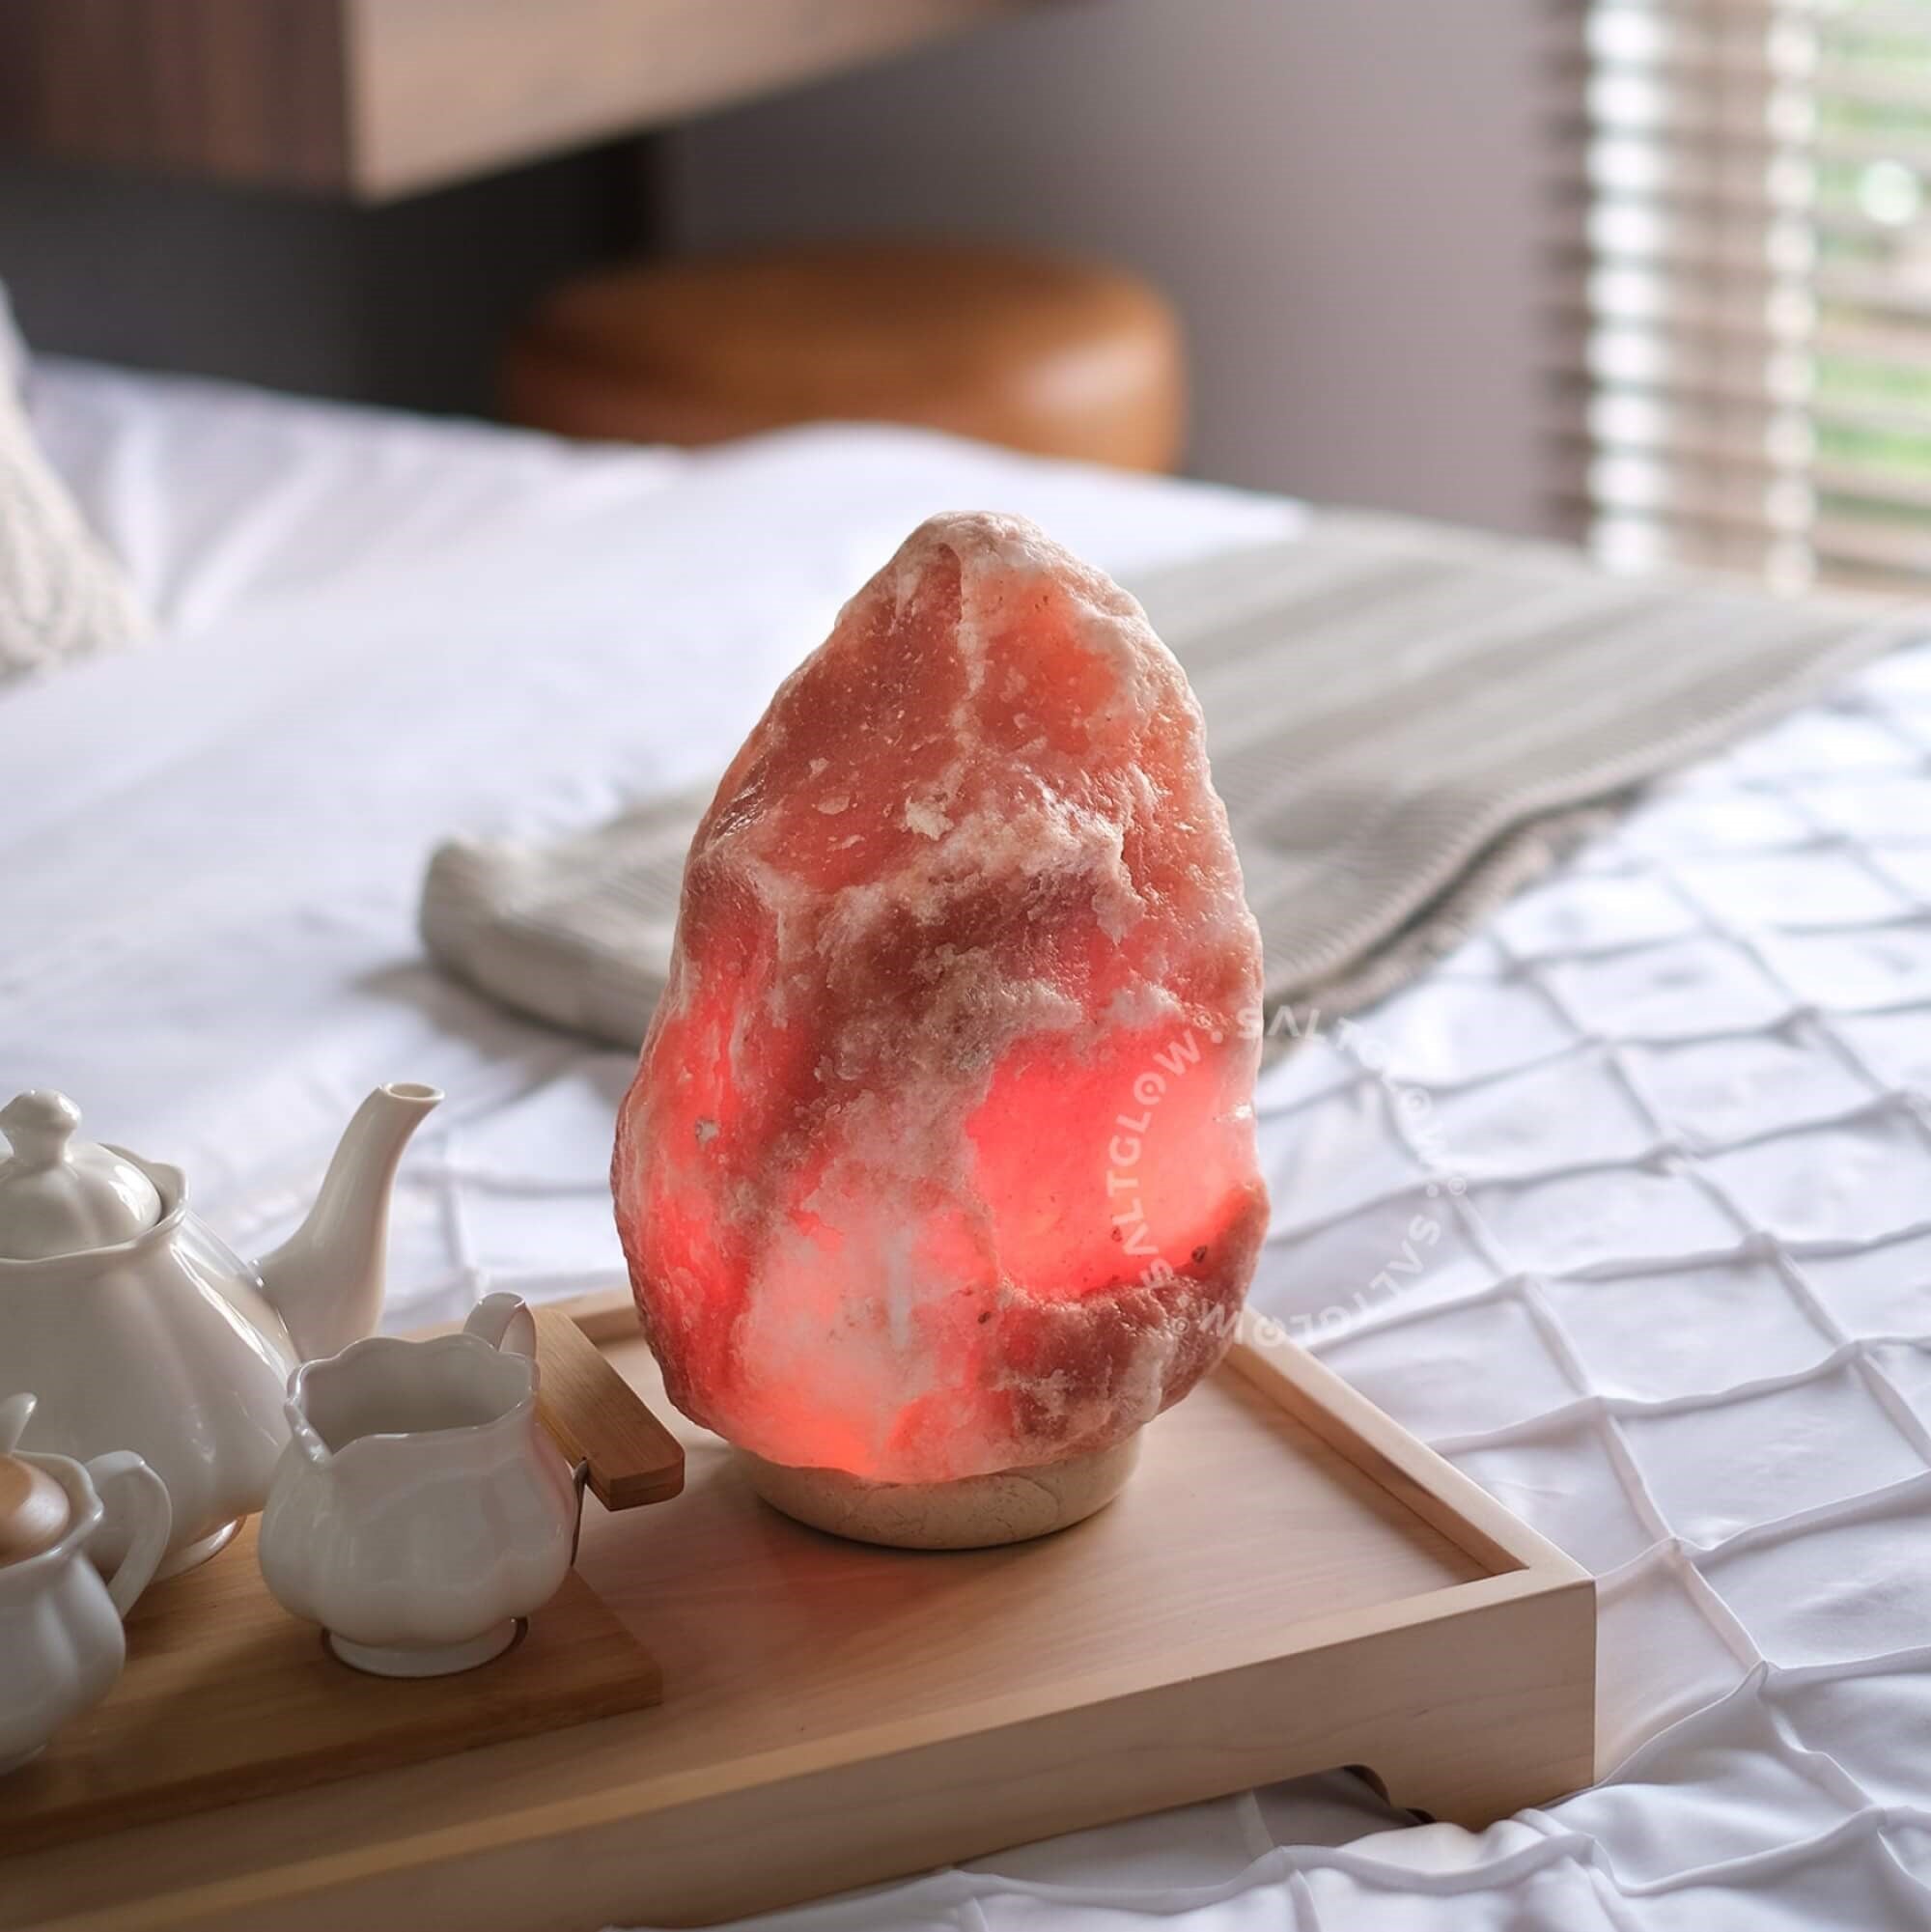 Marble Base For Himalayan Salt Lamps (Fits All Sizes) - Himalayan Trading Co. Himalayan Salt Lamp Himalayan Pink Salt